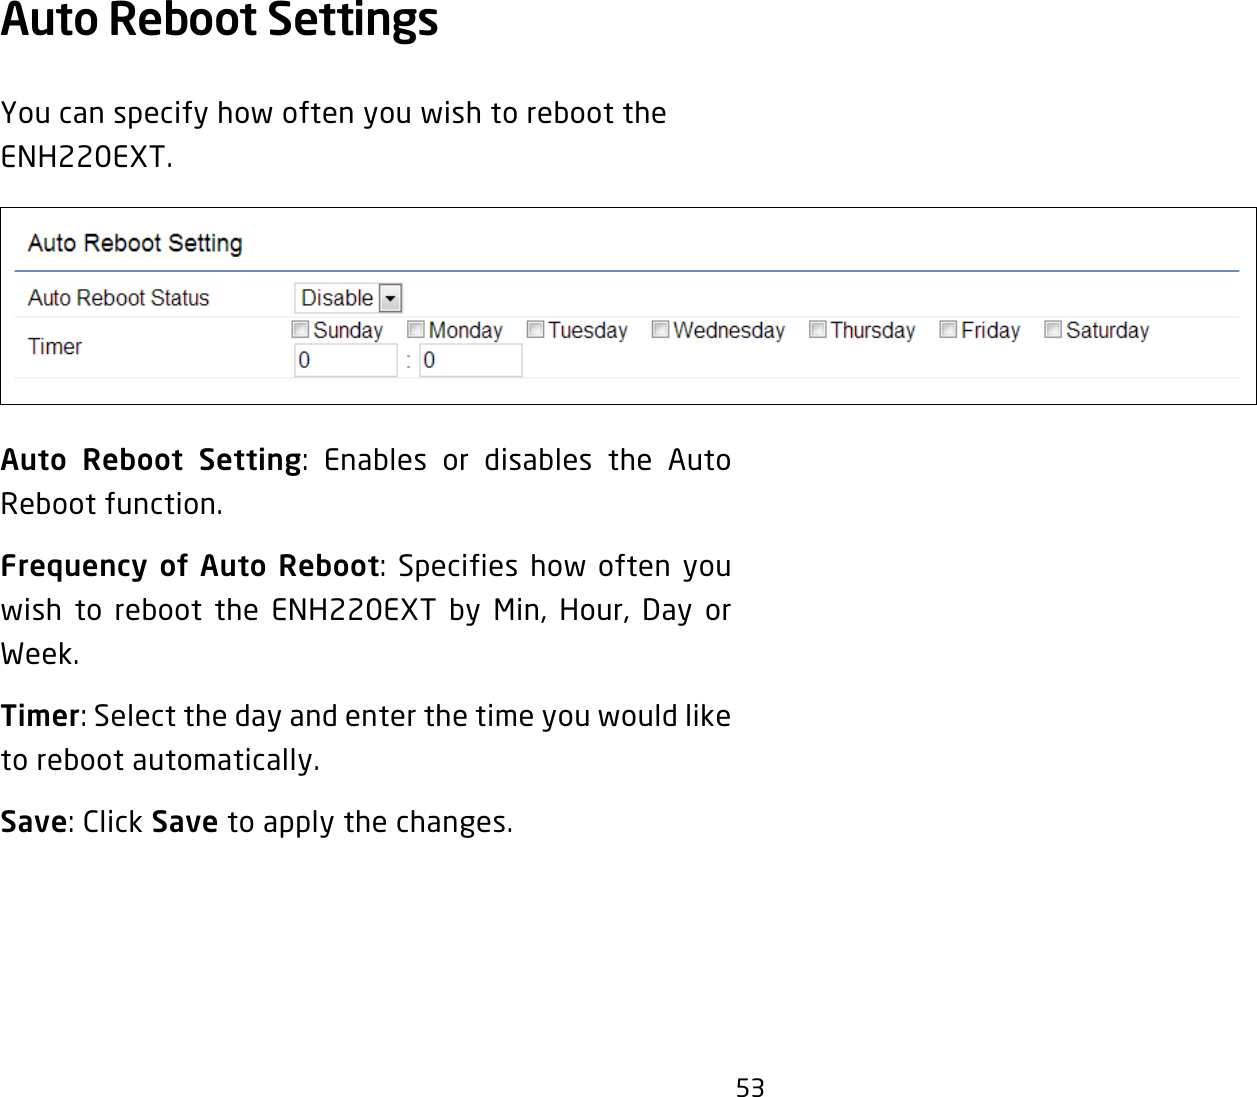 53Auto Reboot Settings You can specify how often you wish to reboot the ENH220EXT.Auto Reboot Setting: Enables or disables the Auto Reboot function.Frequency of Auto Reboot: Specifies how often you wish to reboot the ENH220EXT by Min, Hour, Day or Week.Timer: Select the day and enter the time you would like to reboot automatically.Save: Click Save to apply the changes.